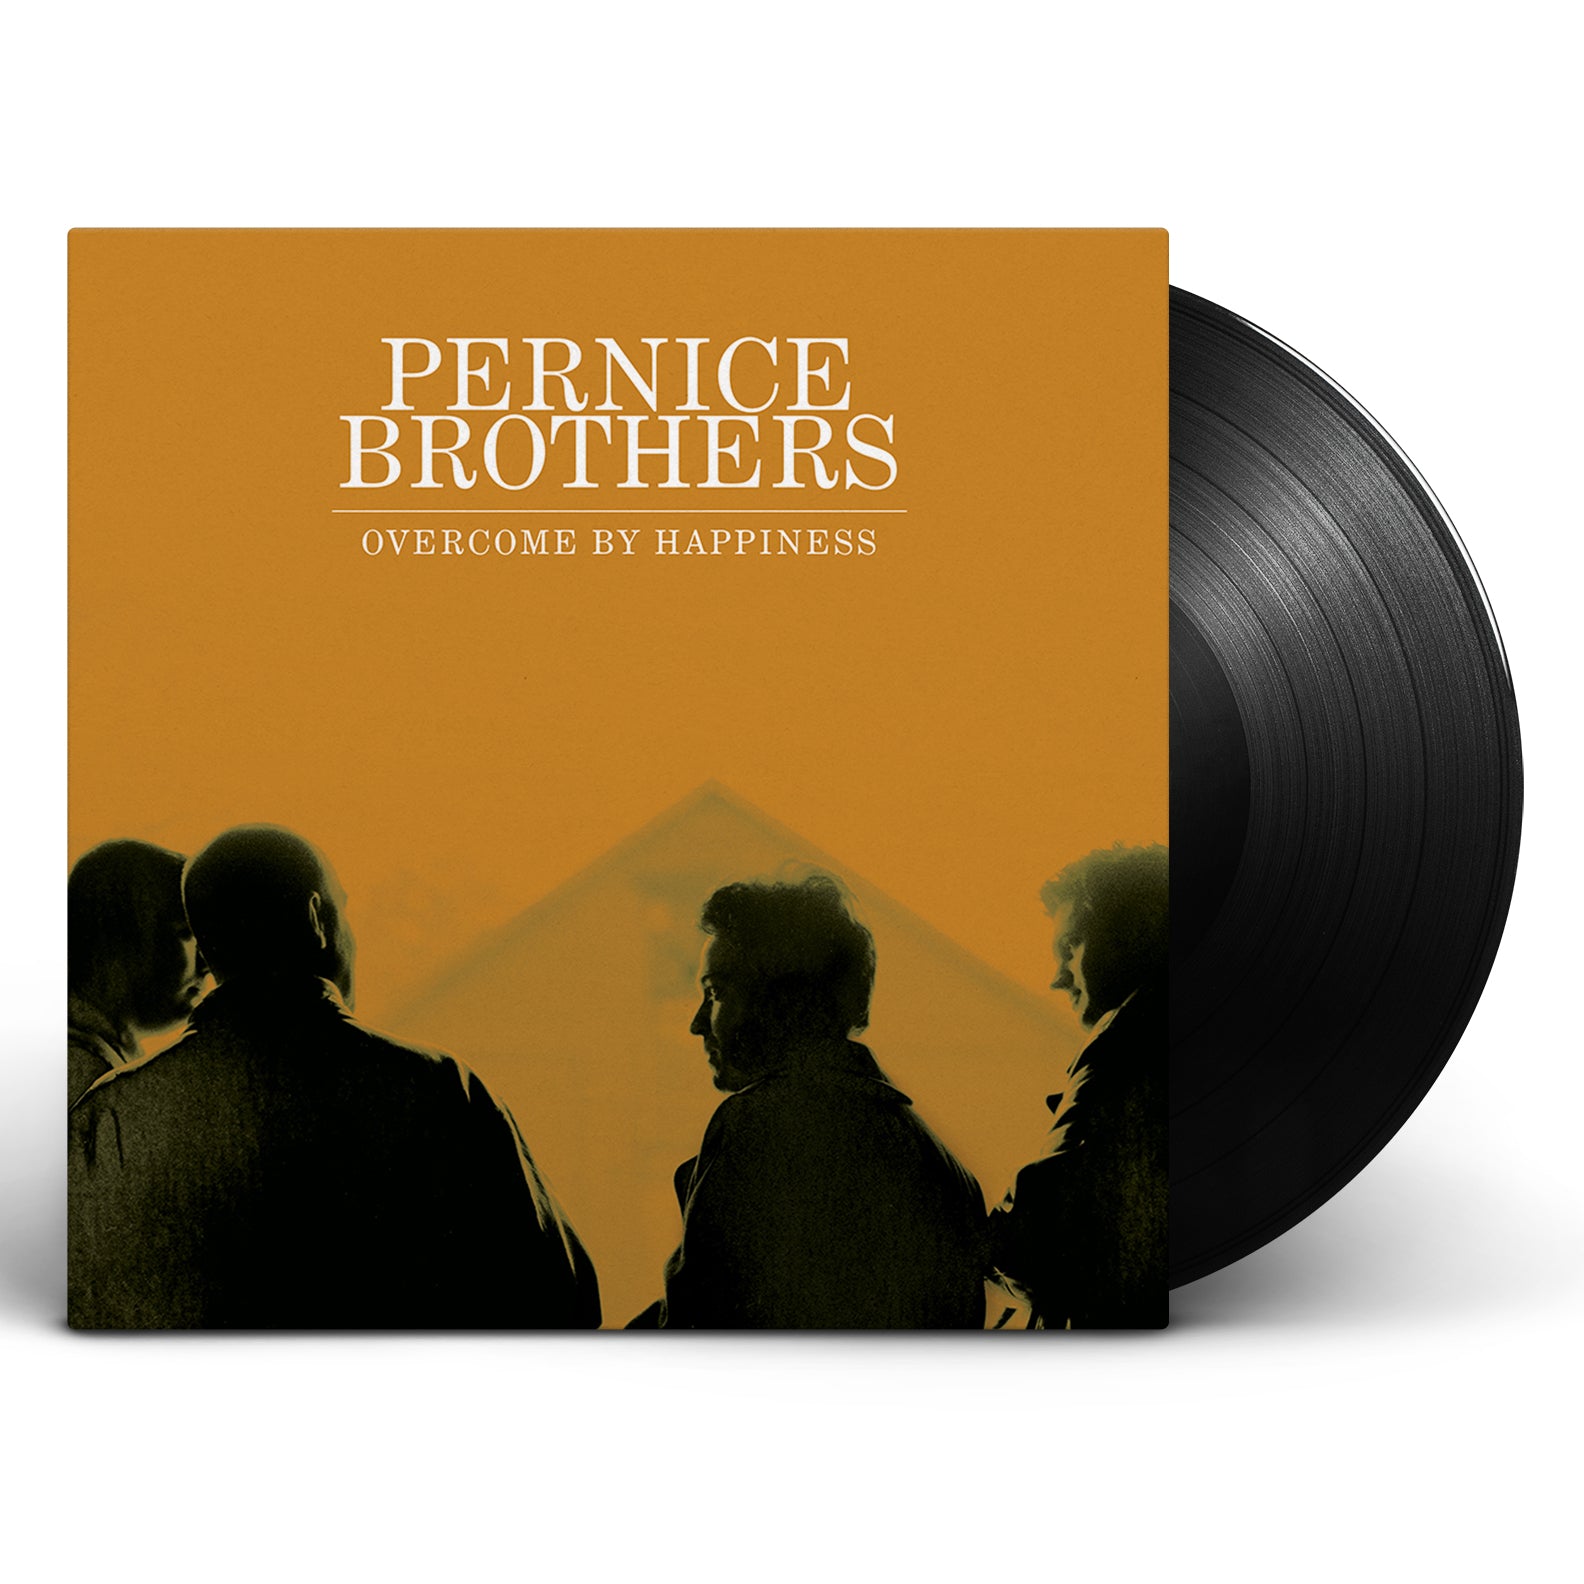 Pernice Brothers - Overcome by Happiness (25th Anniversary Edition) [Vinyl]